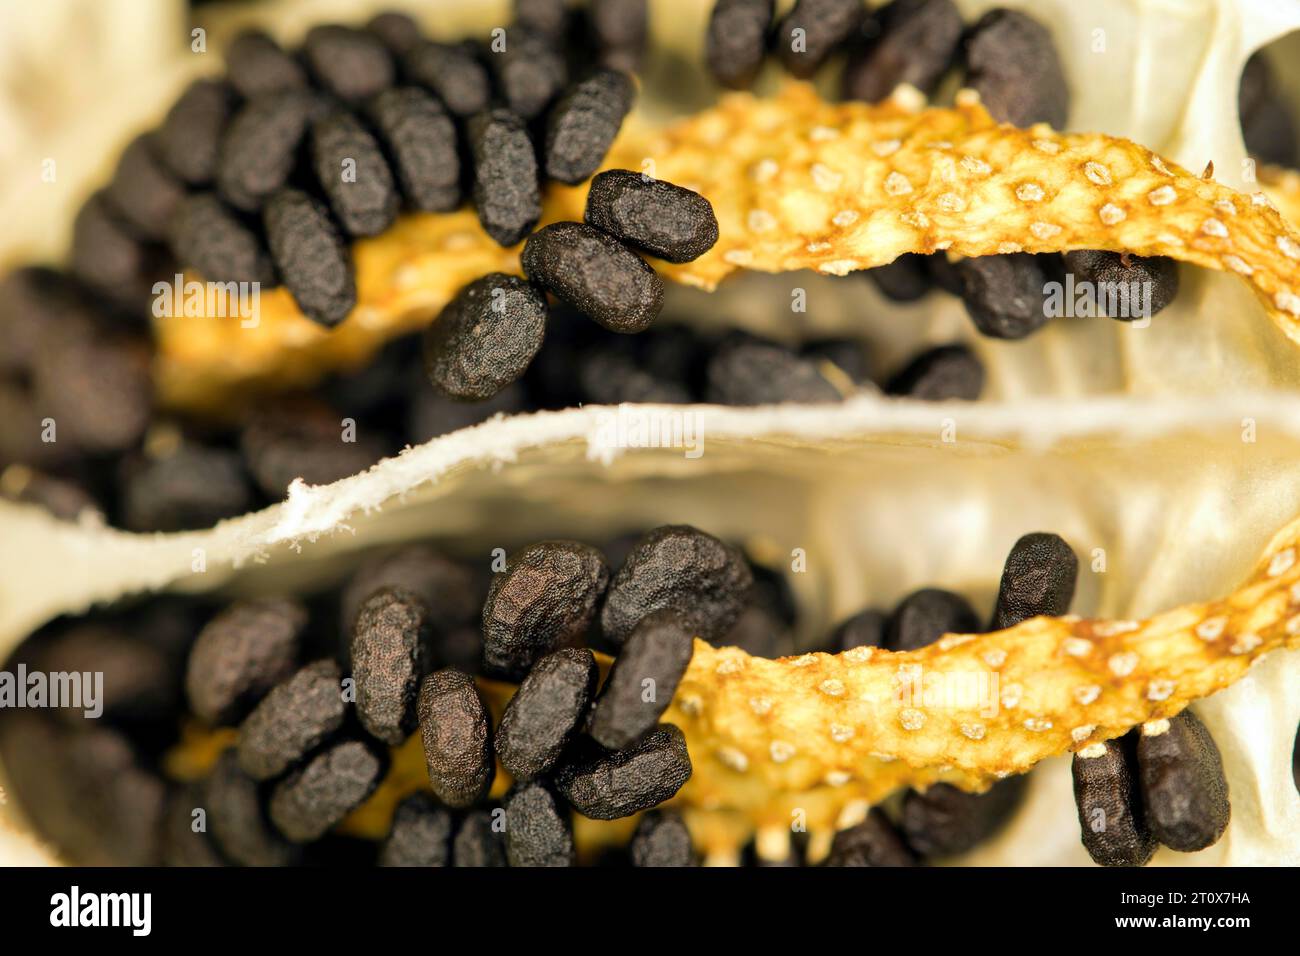 Opened seedpod with seeds of a poisonous (datura), studio photograph with black background Stock Photo